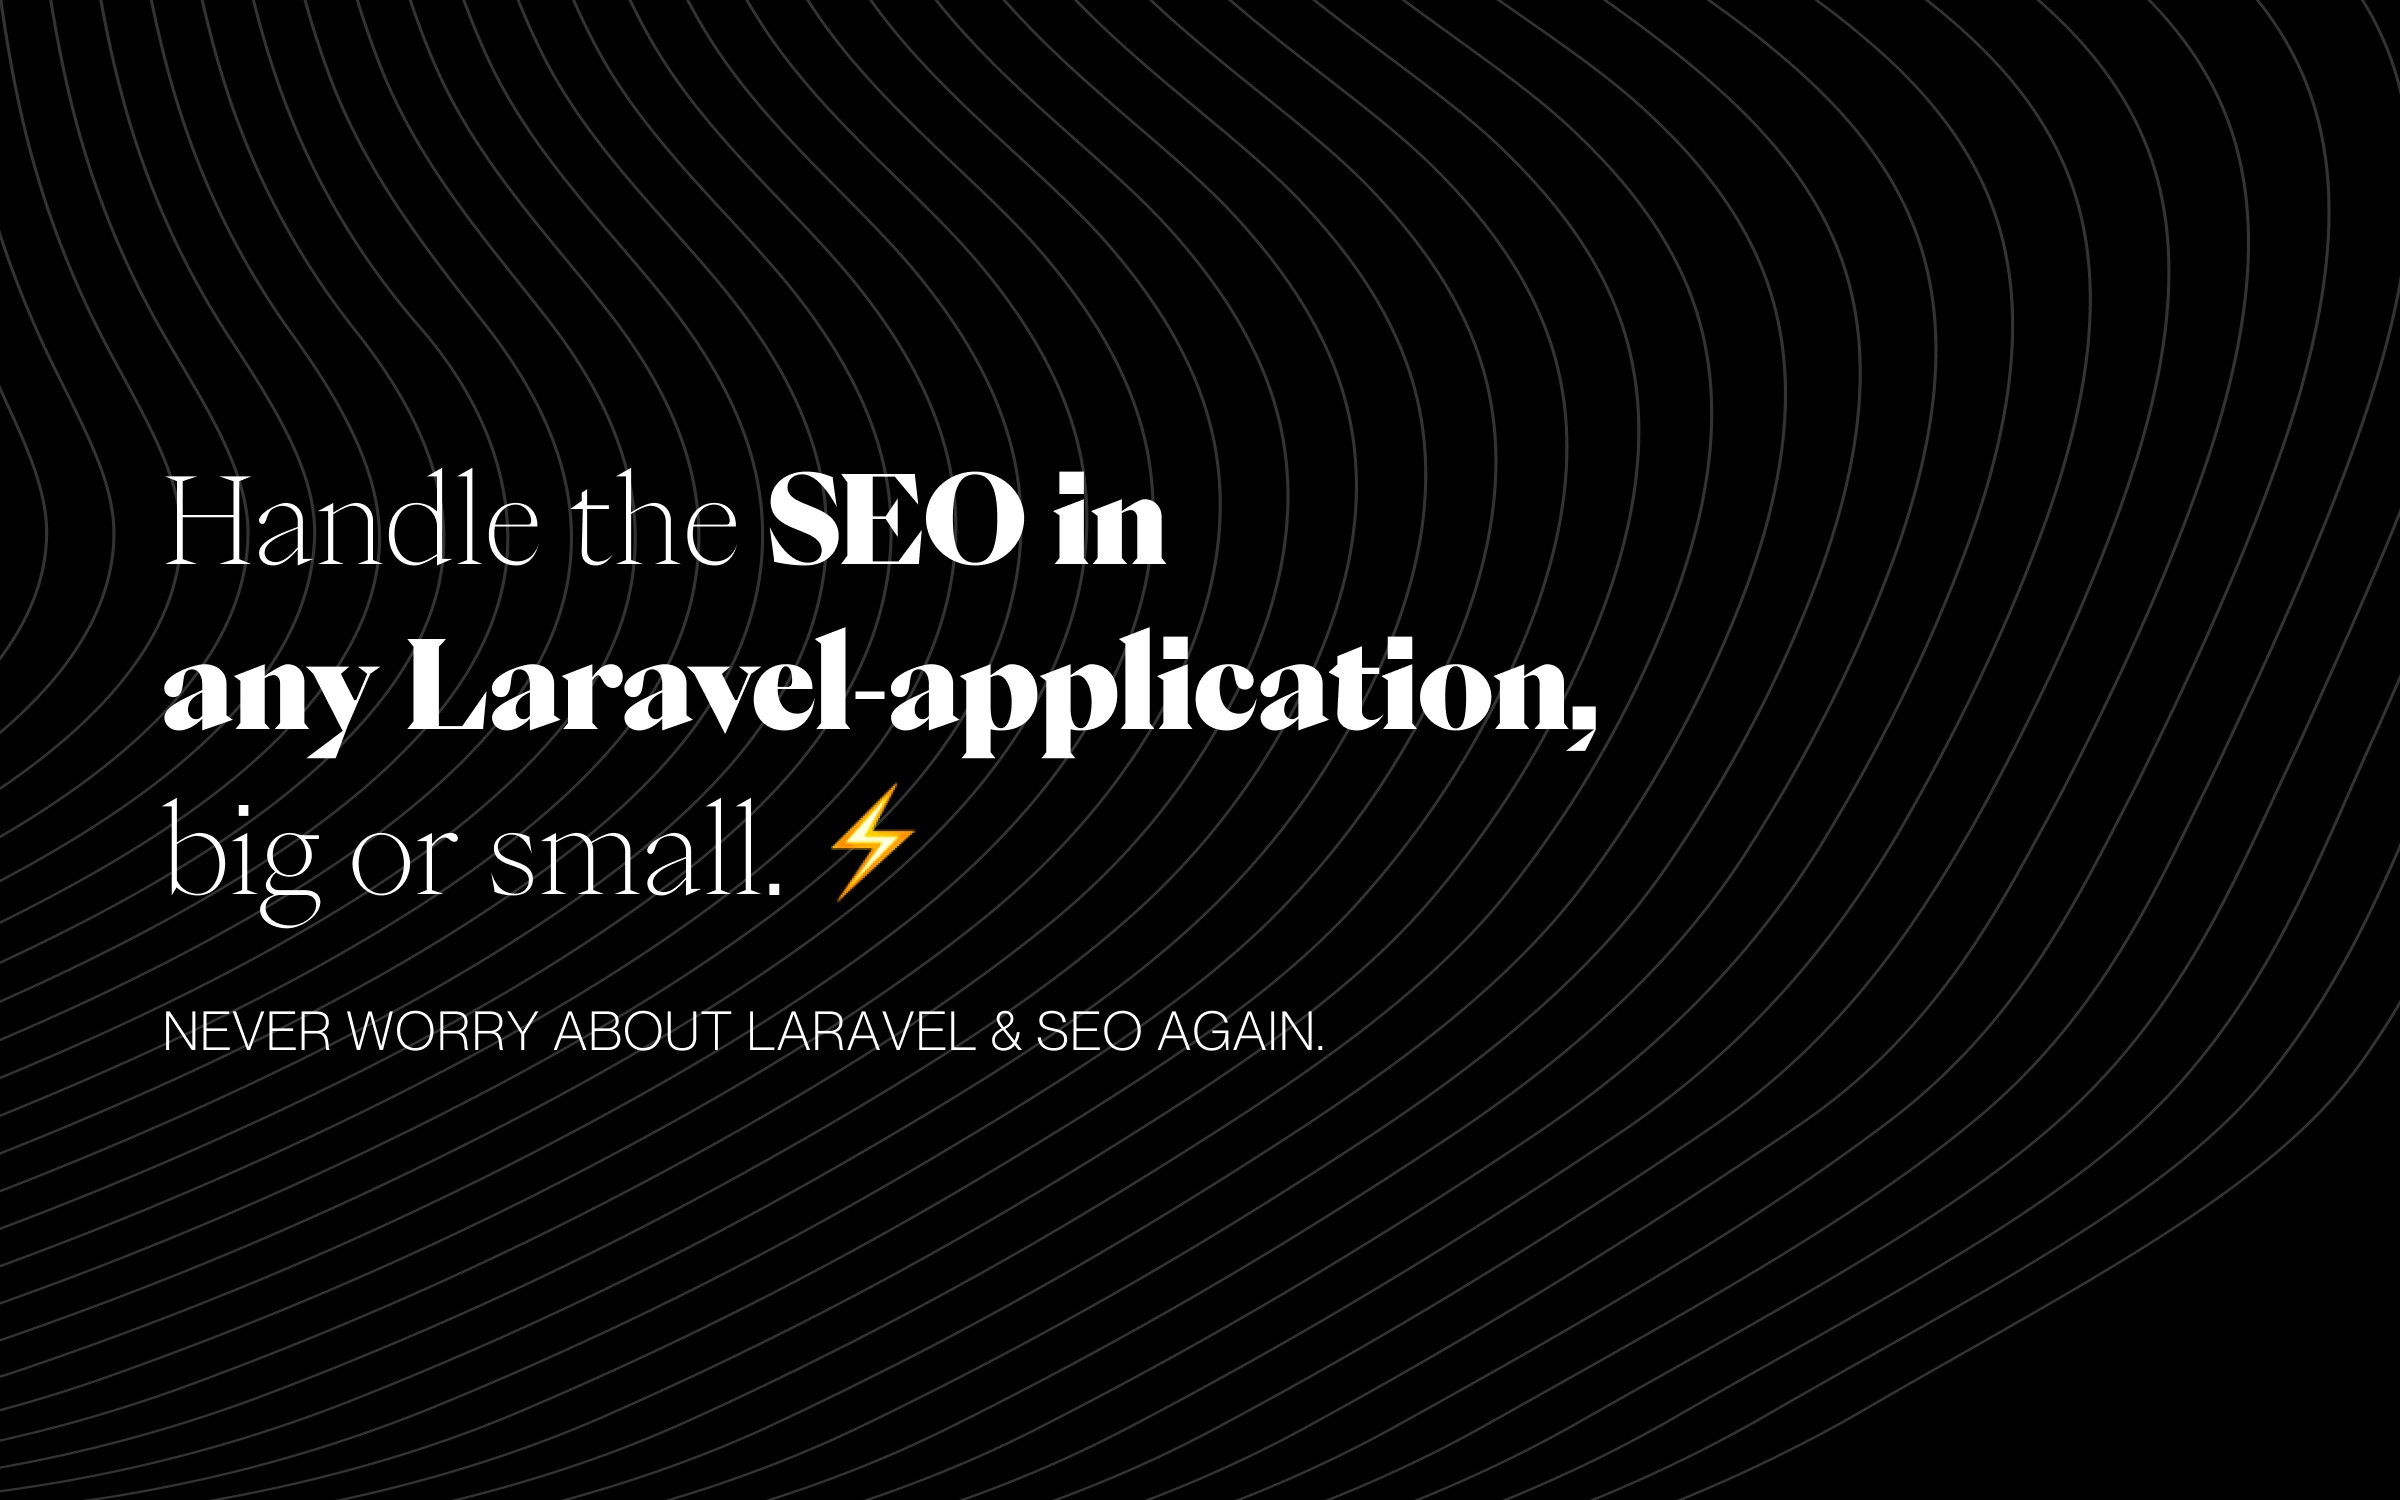 New package: A package to handle the SEO in any Laravel-application